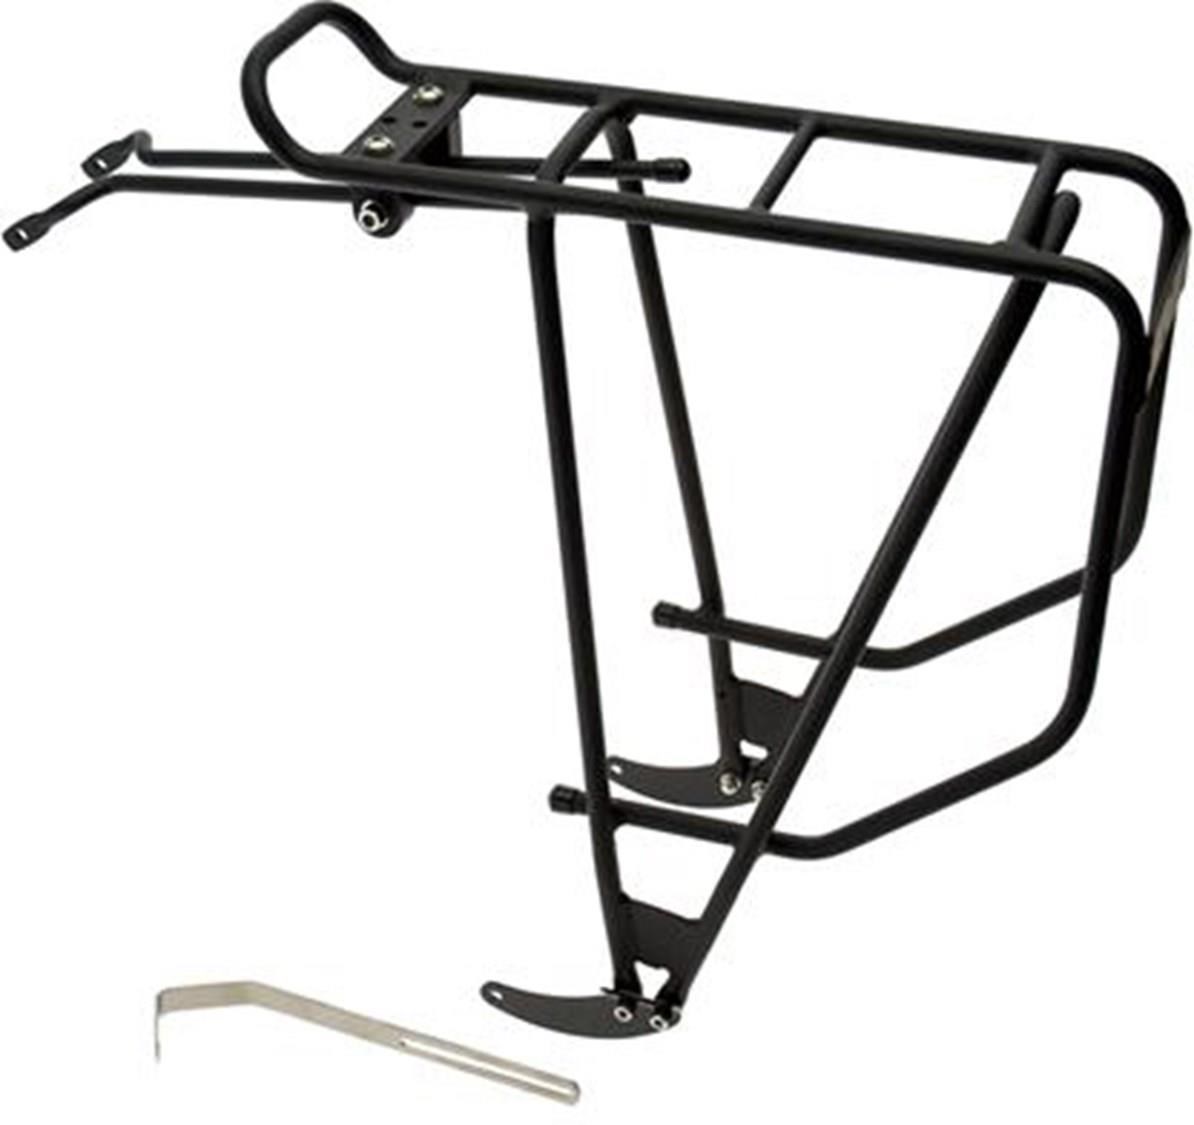 Axiom Streamliner Disc Deluxe Rear Rack product image